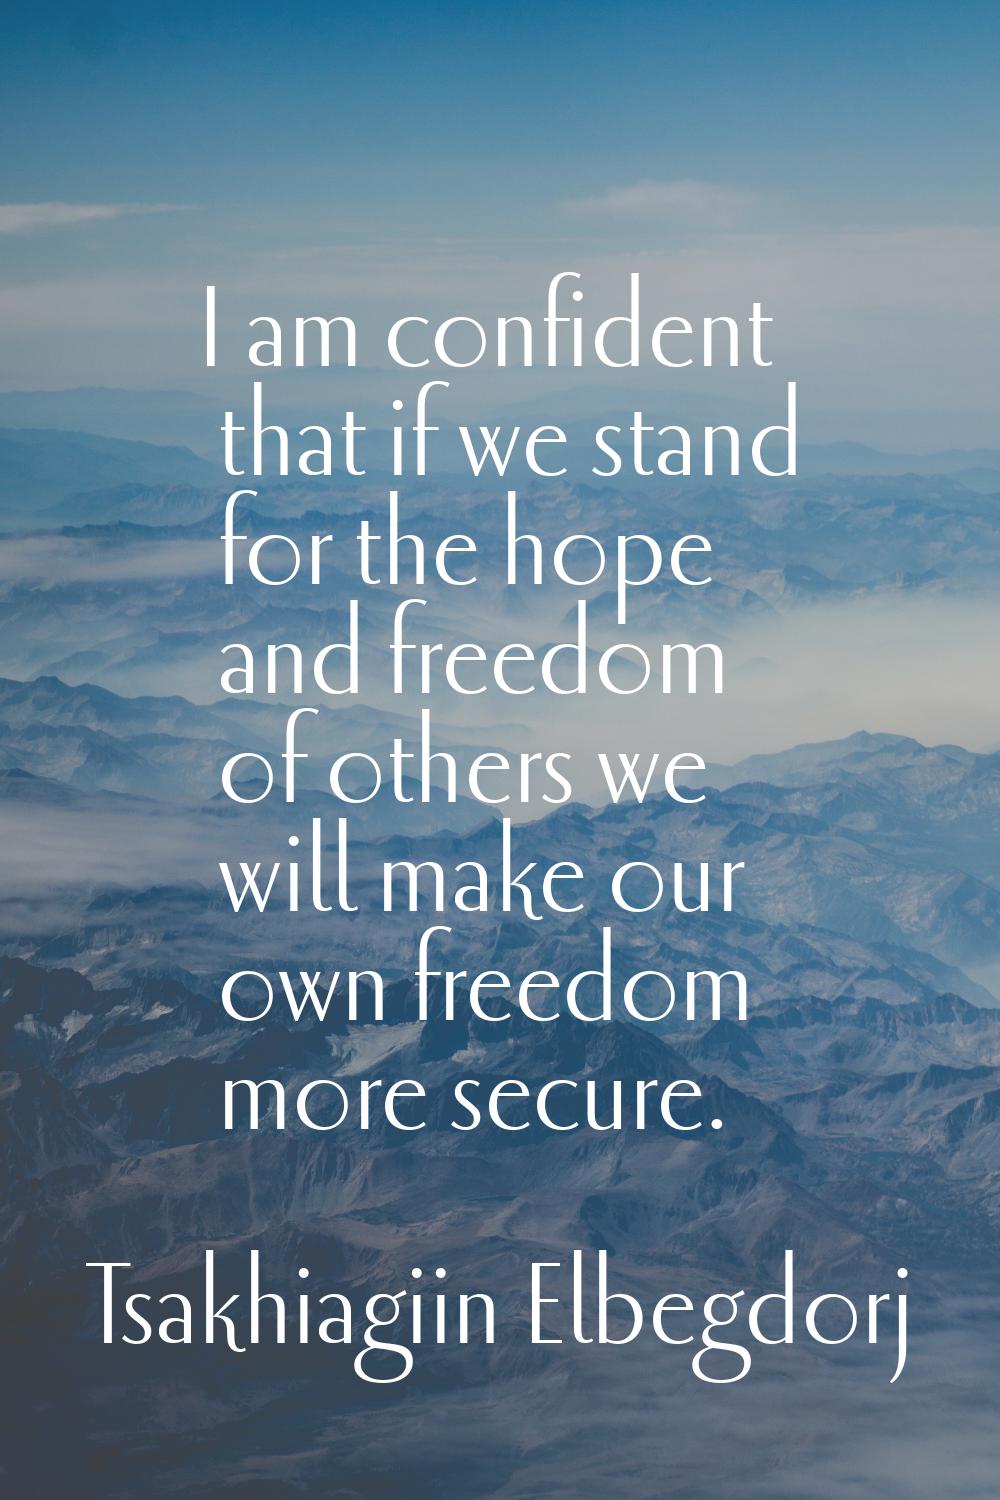 I am confident that if we stand for the hope and freedom of others we will make our own freedom mor